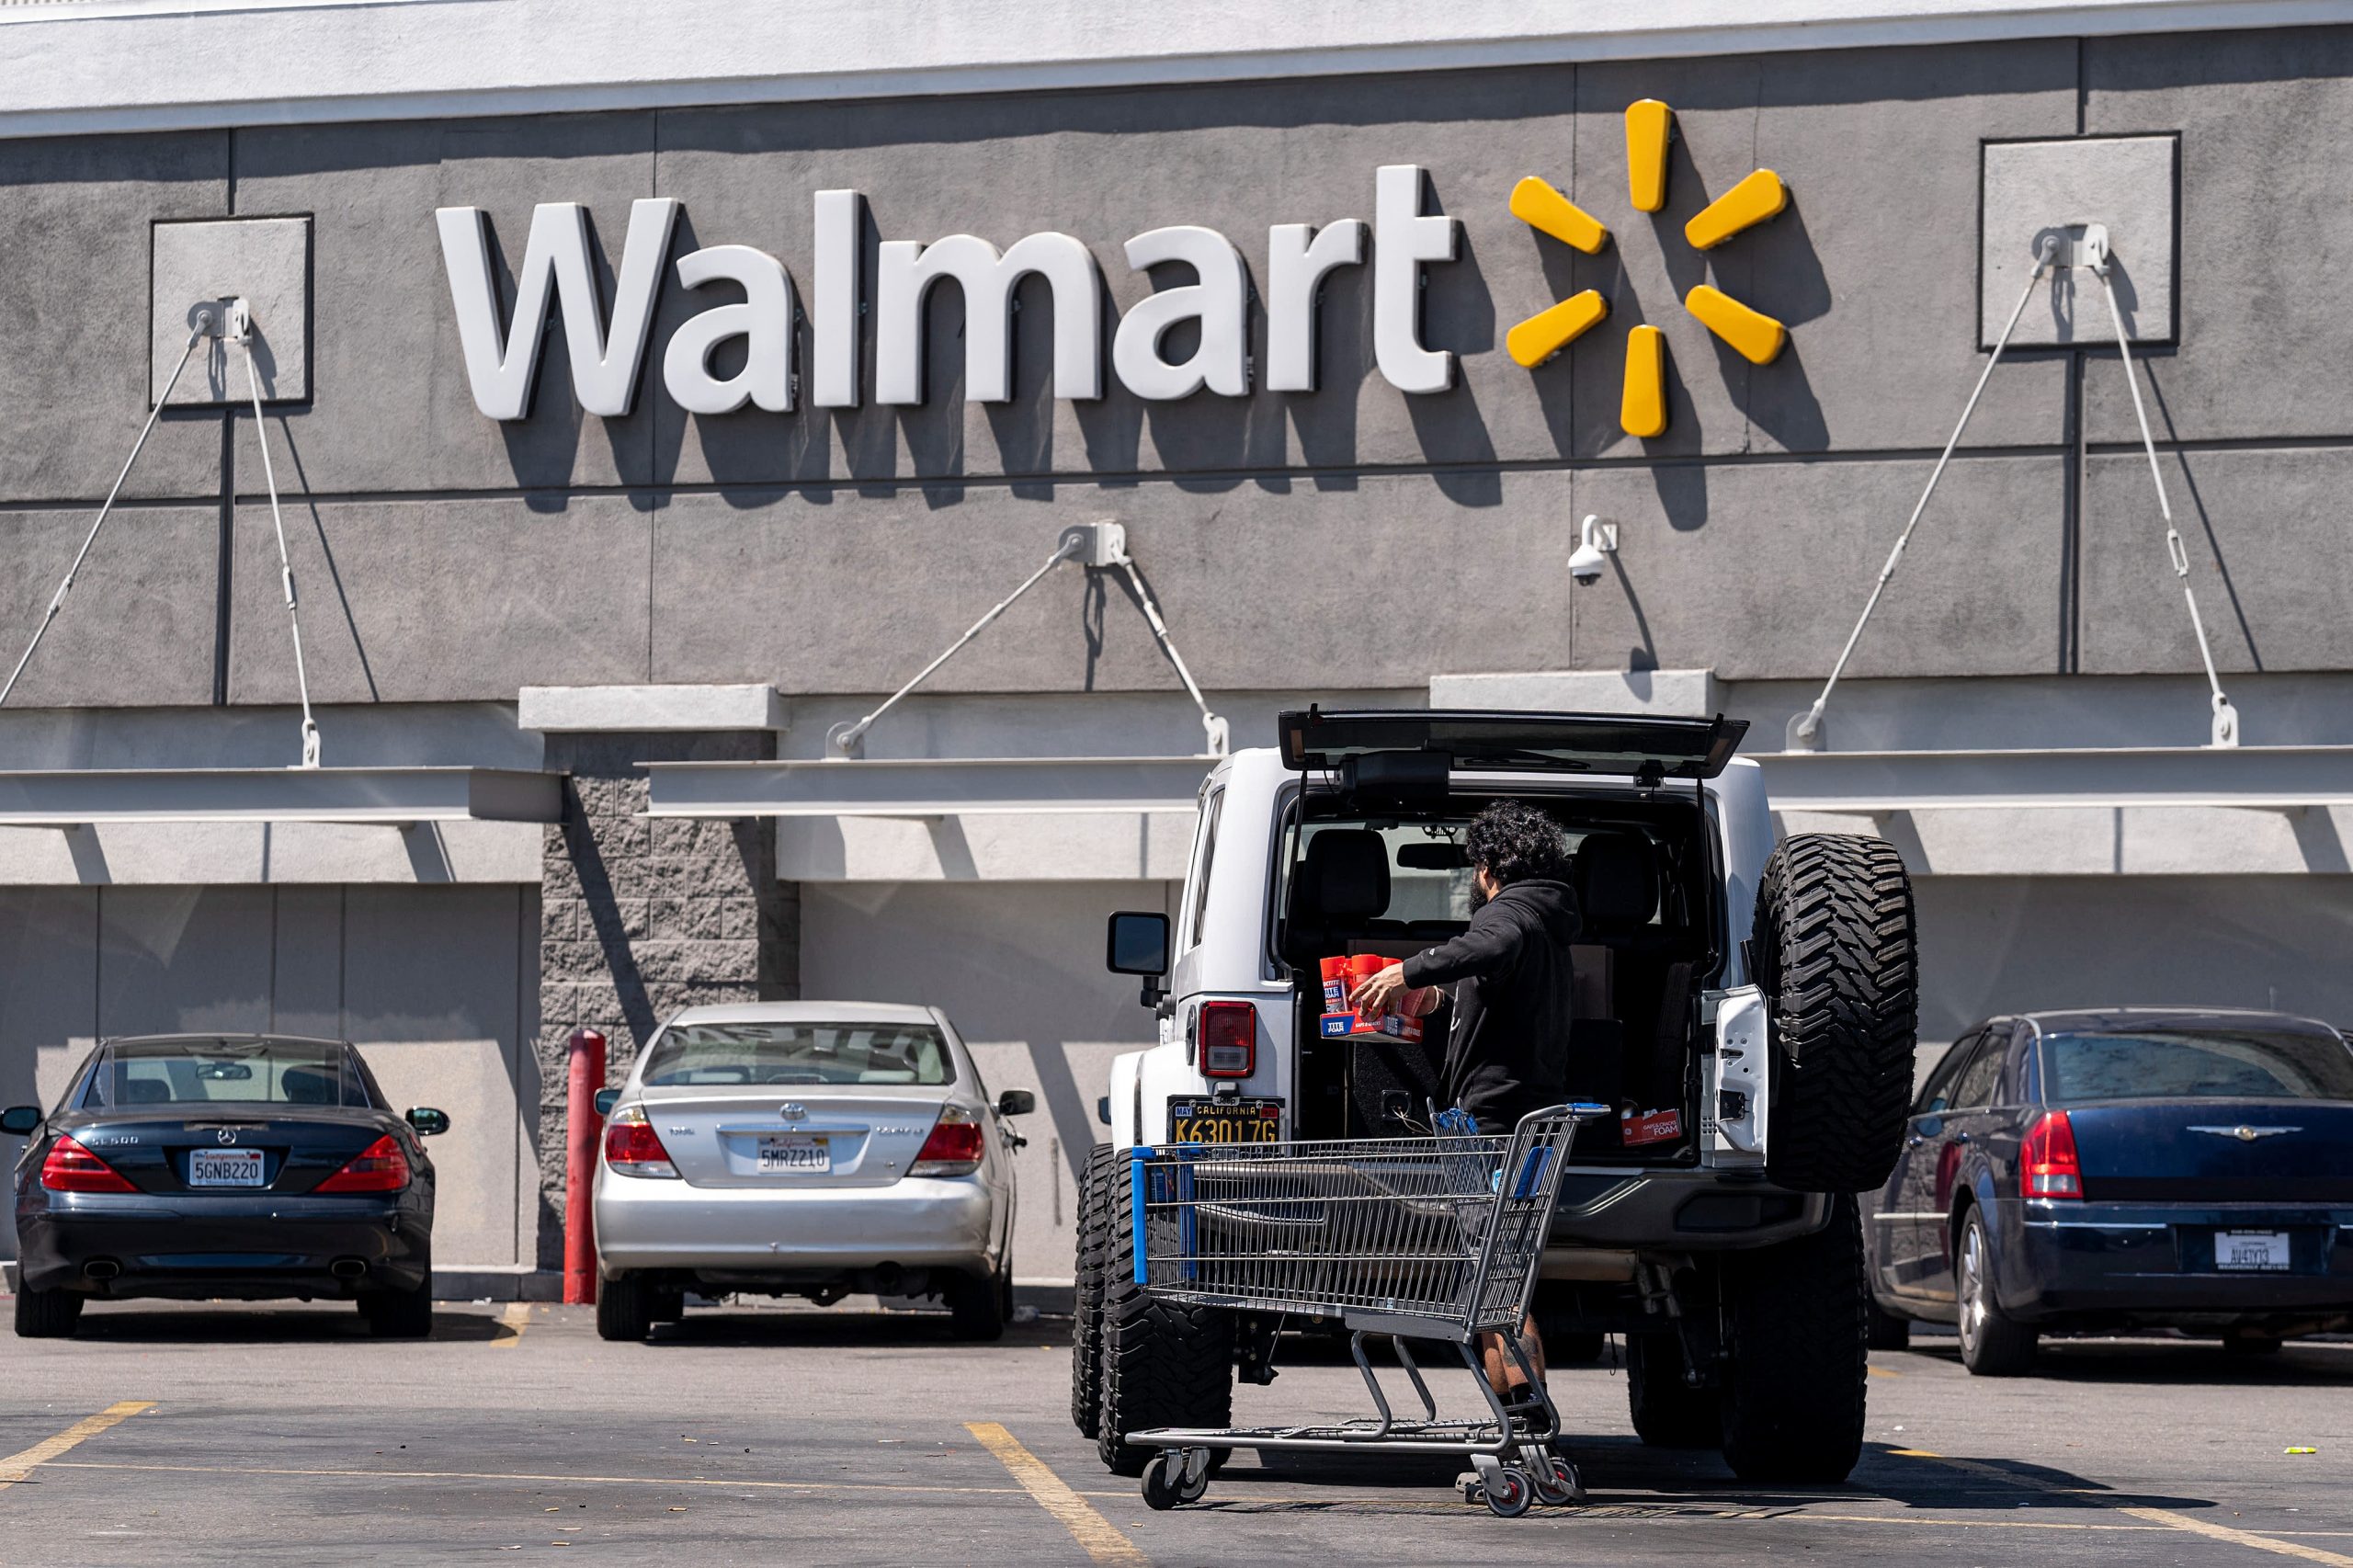 Walmart aims to hire 20,000 supply chain employees as it ramps up for the holiday season